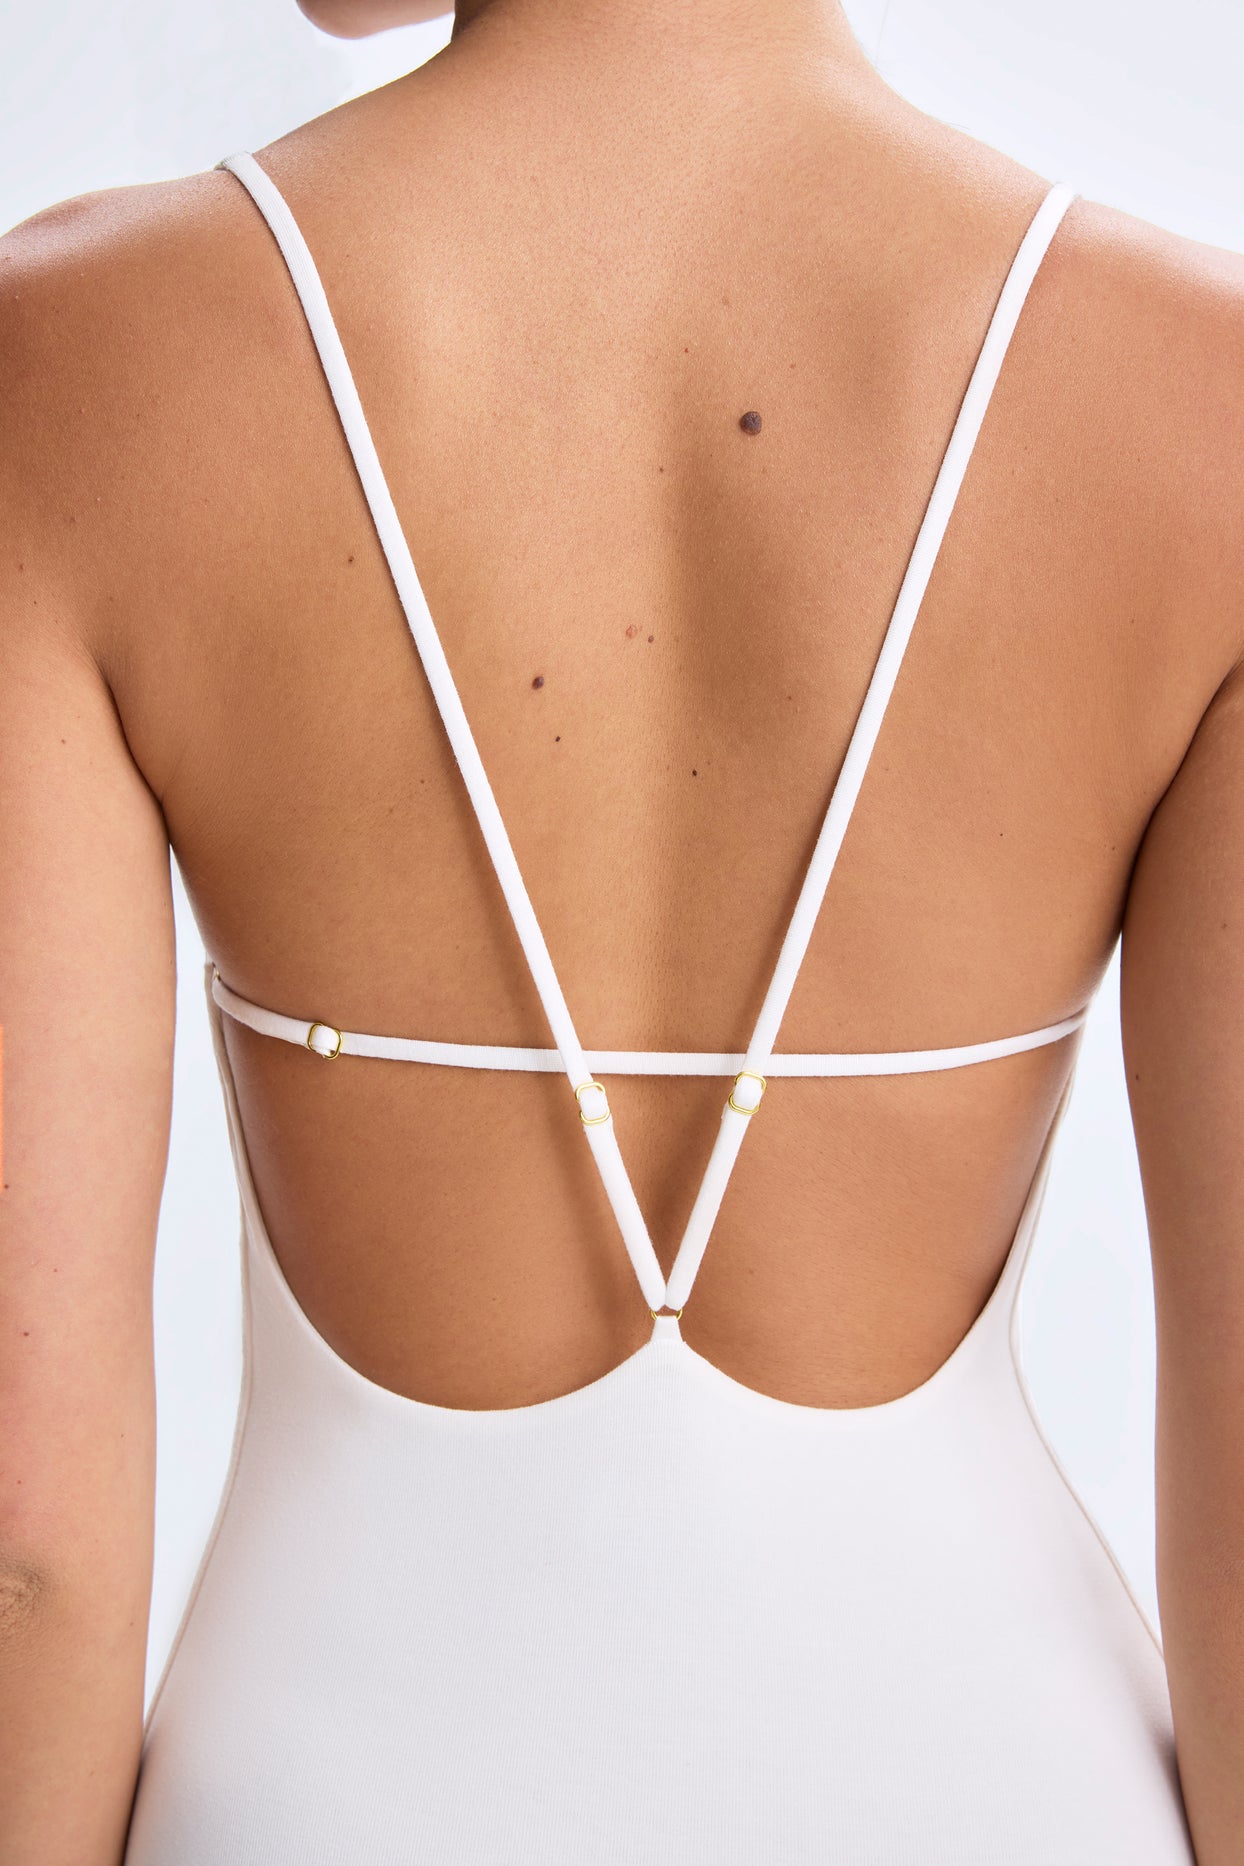 Petite Plunge Open-Back Flared Jumpsuit in White